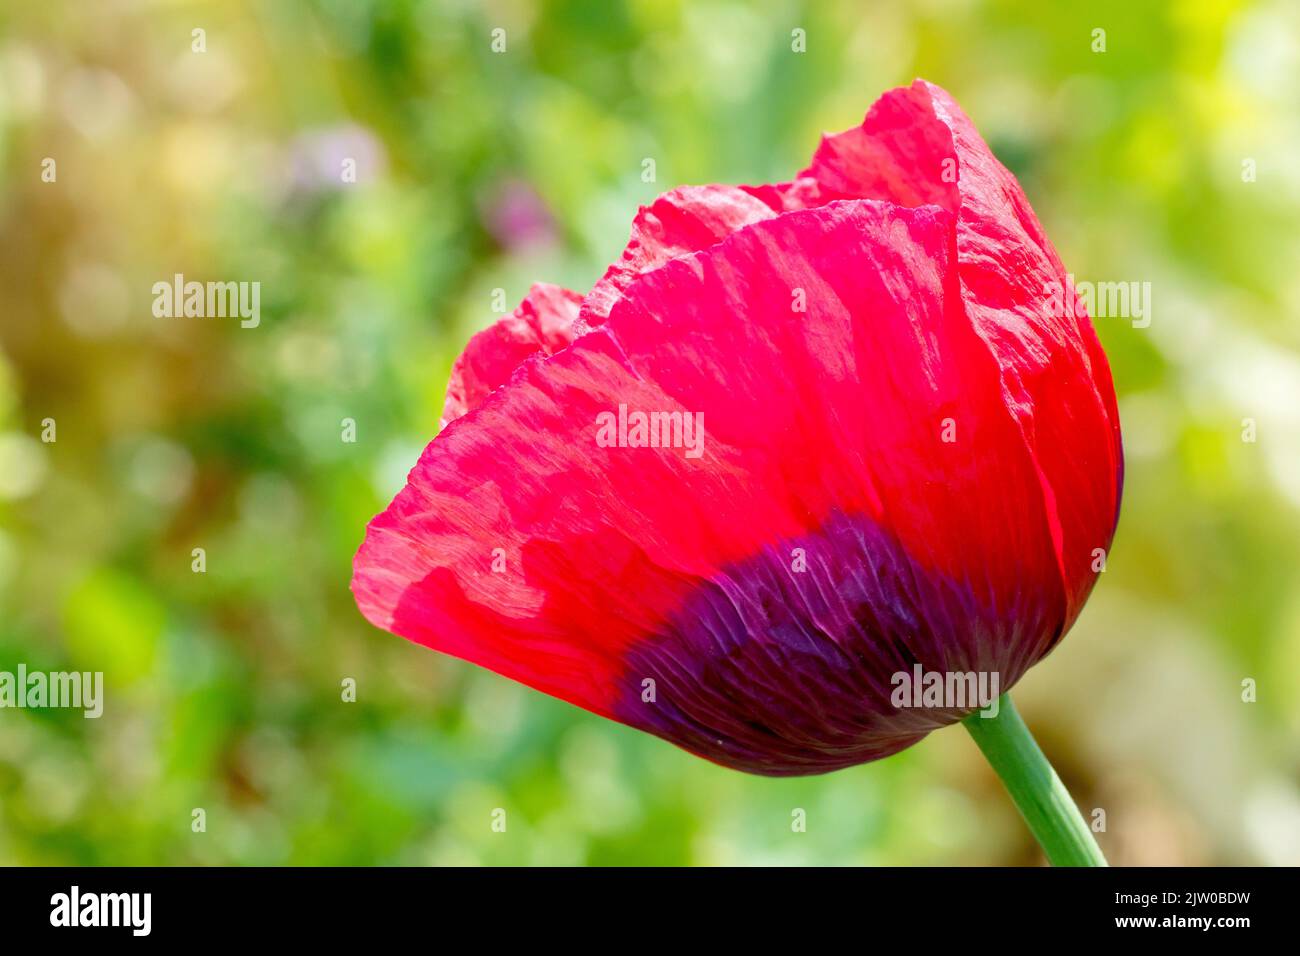 Opium Poppy (papaver somniferum), close up showing a solitary red flower isolated against an out of focus background. Stock Photo